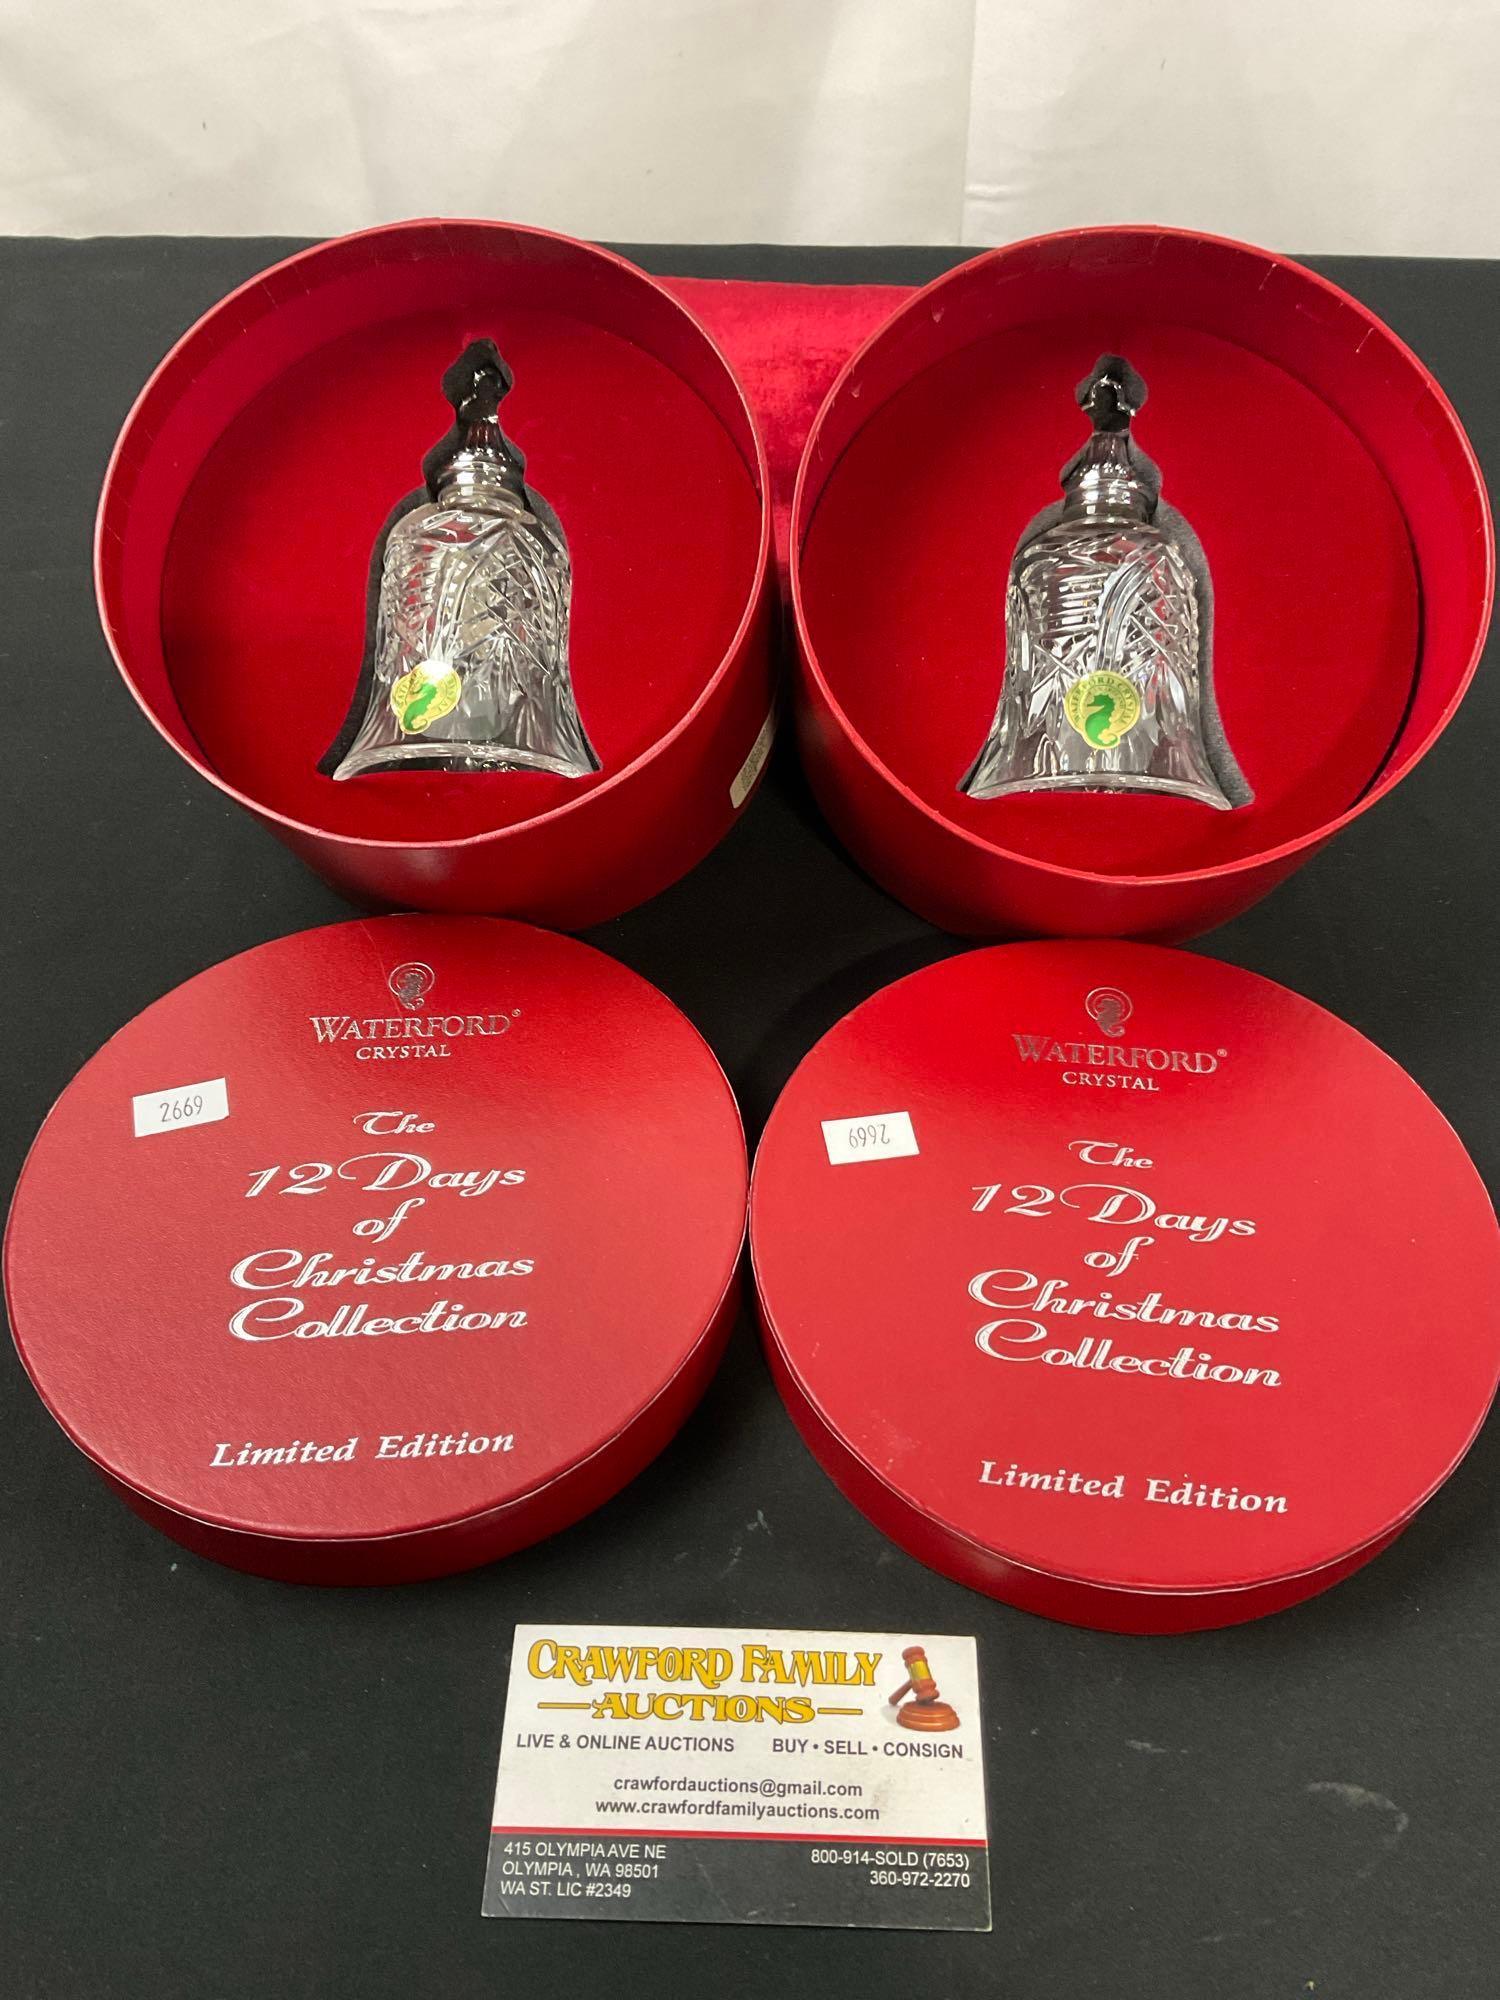 Pair of Waterford Crystal Bells, The 12 Days of Christmas Collection, Limited Edition